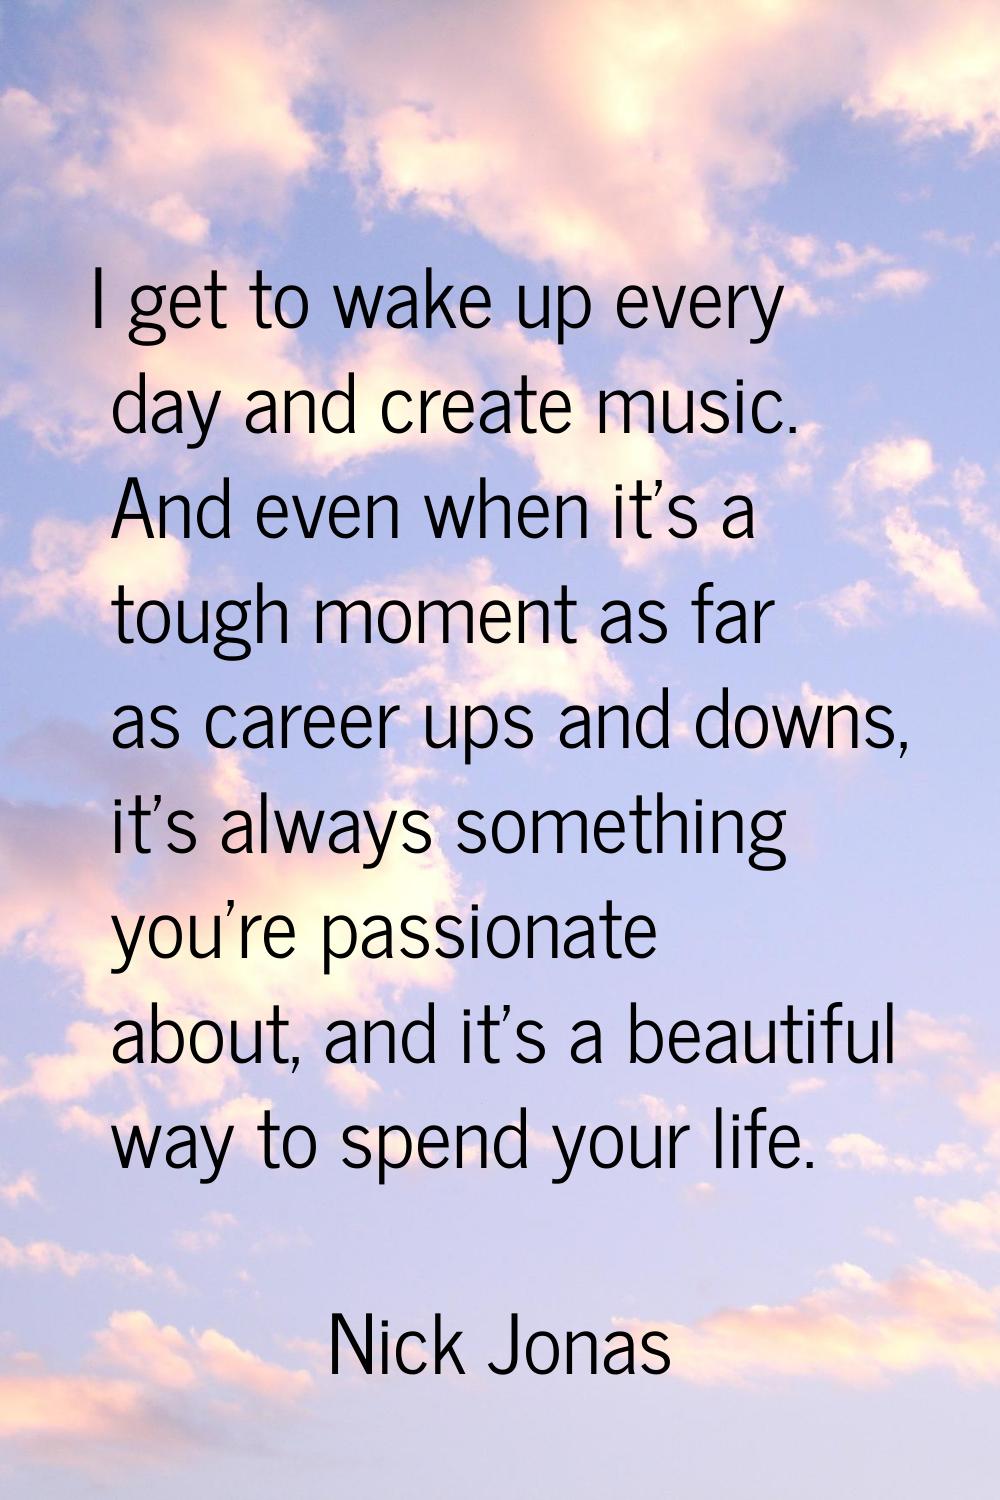 I get to wake up every day and create music. And even when it's a tough moment as far as career ups